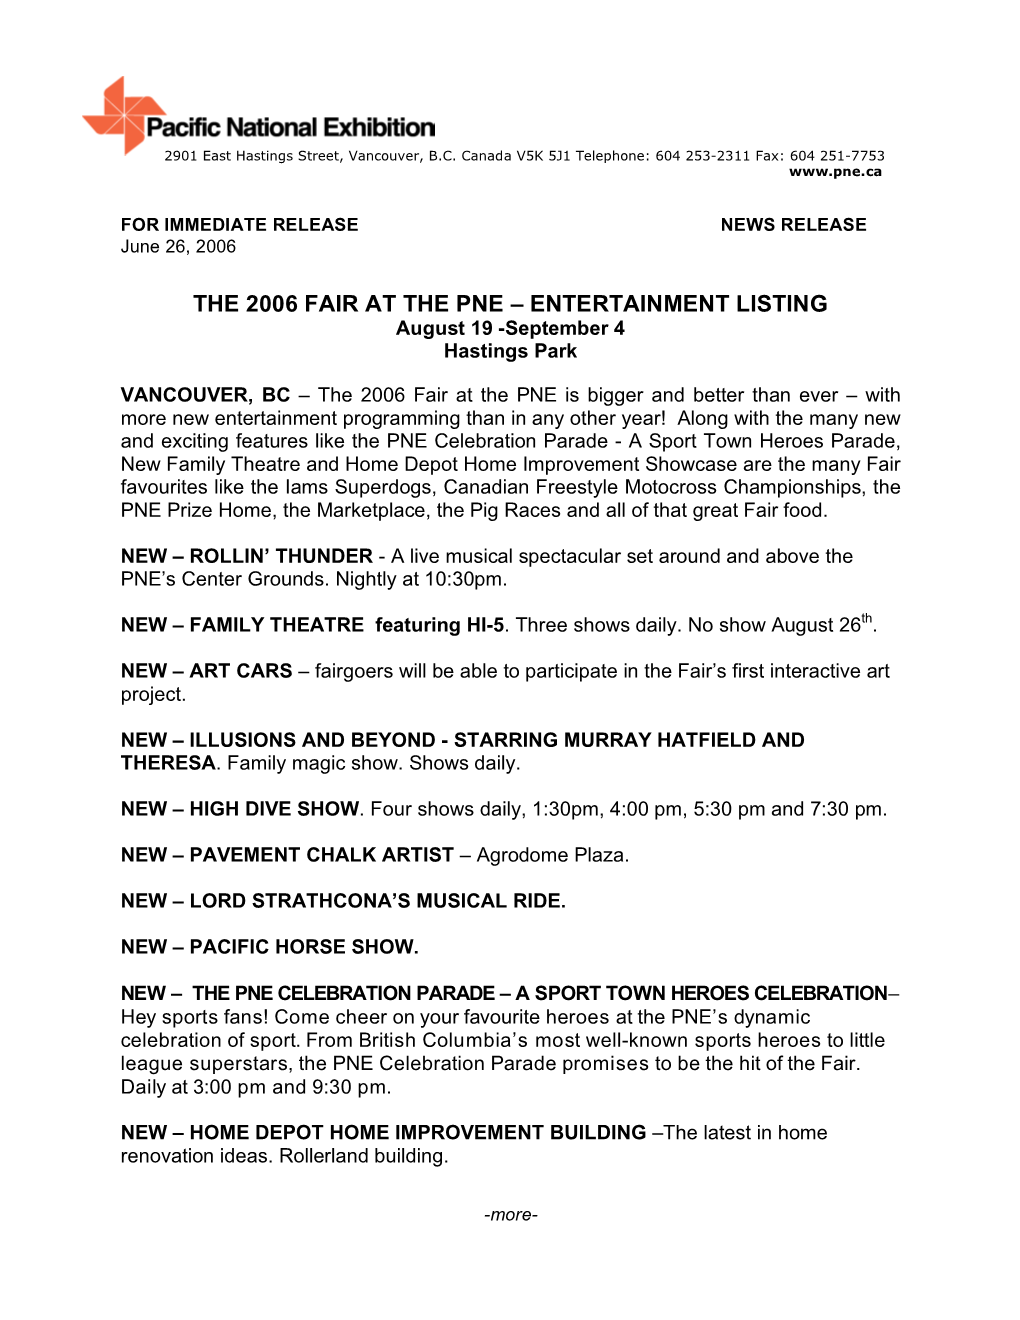 THE 2006 FAIR at the PNE – ENTERTAINMENT LISTING August 19 -September 4 Hastings Park